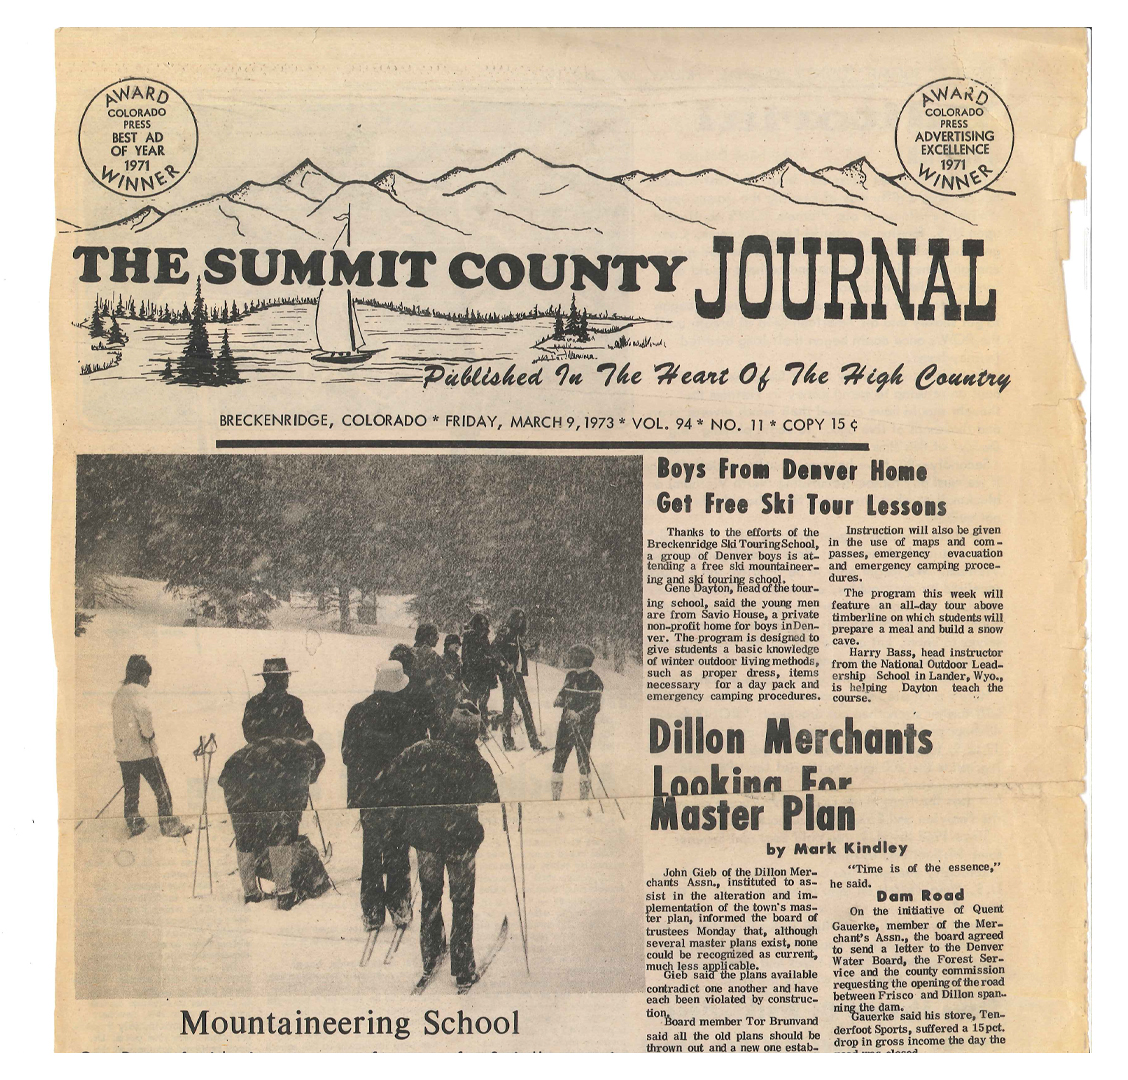 Front page local news coverage for Gene’s Ski Mountaineering & Ski School highlighting a local boys group from Denver.